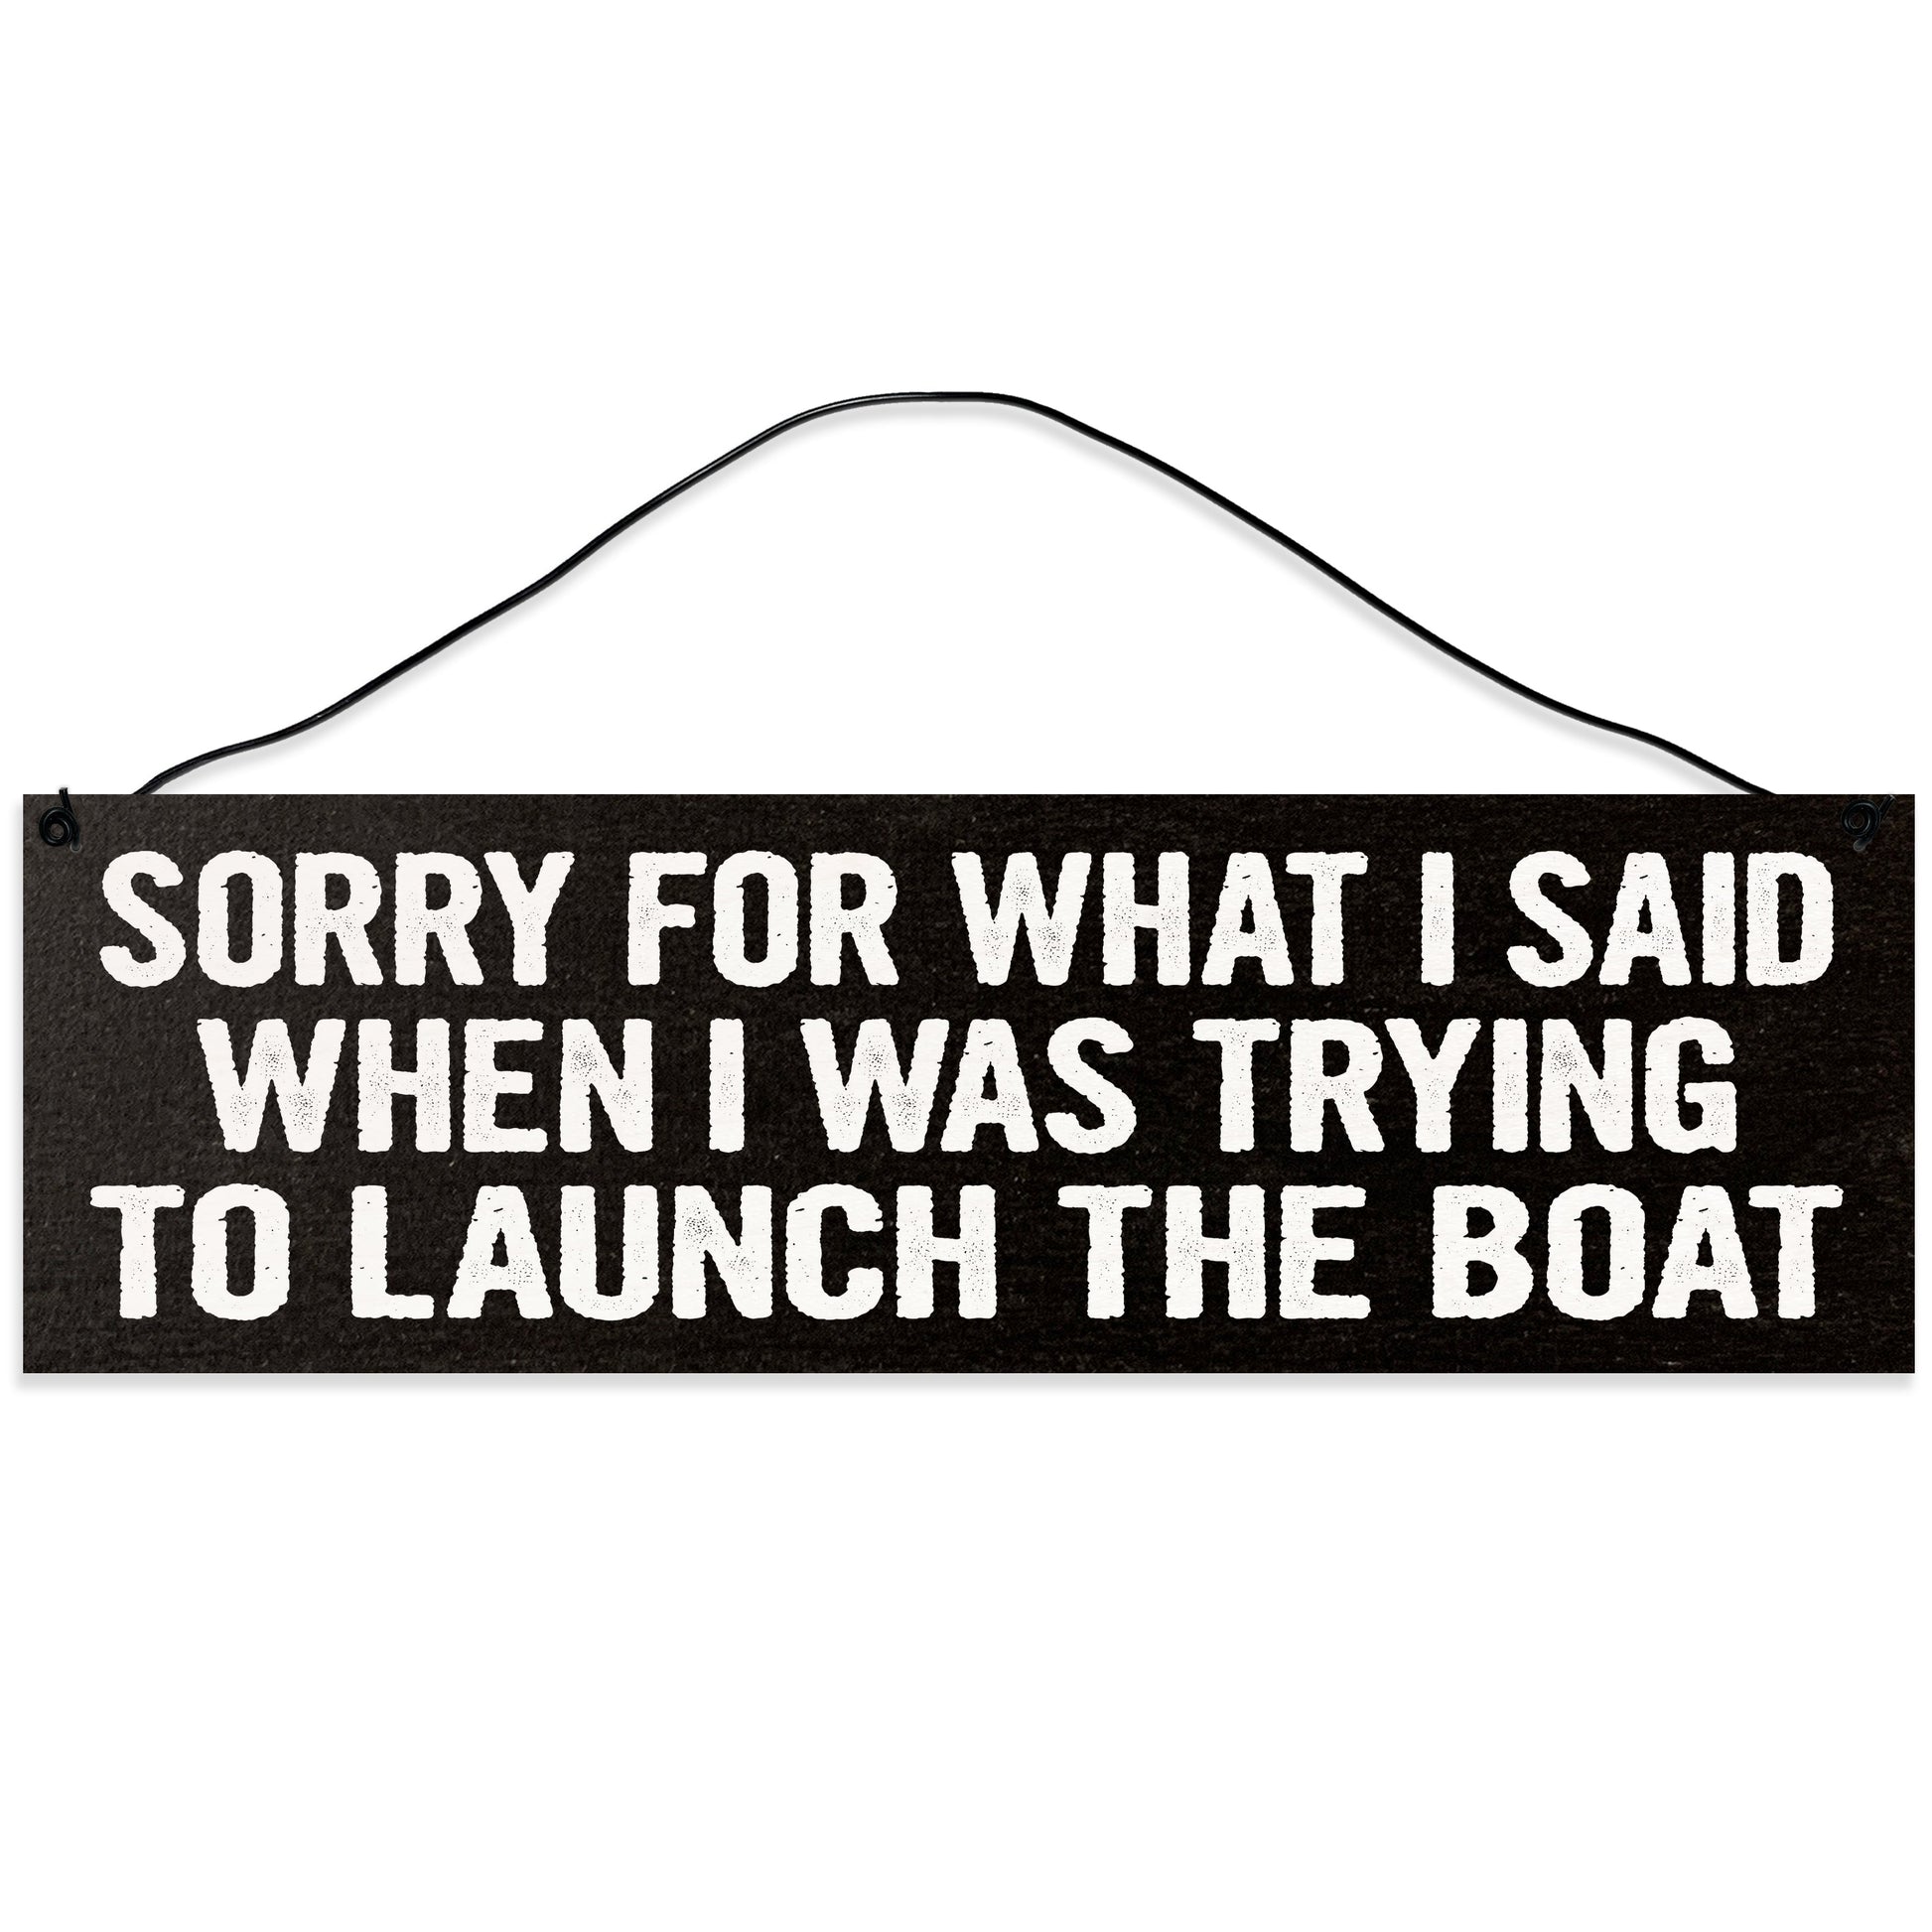 Sawyer's Mill - Sorry for What I Said While Trying to Launch The Boat. Wood Sign for Home or Office. Measures 3x10 inches.